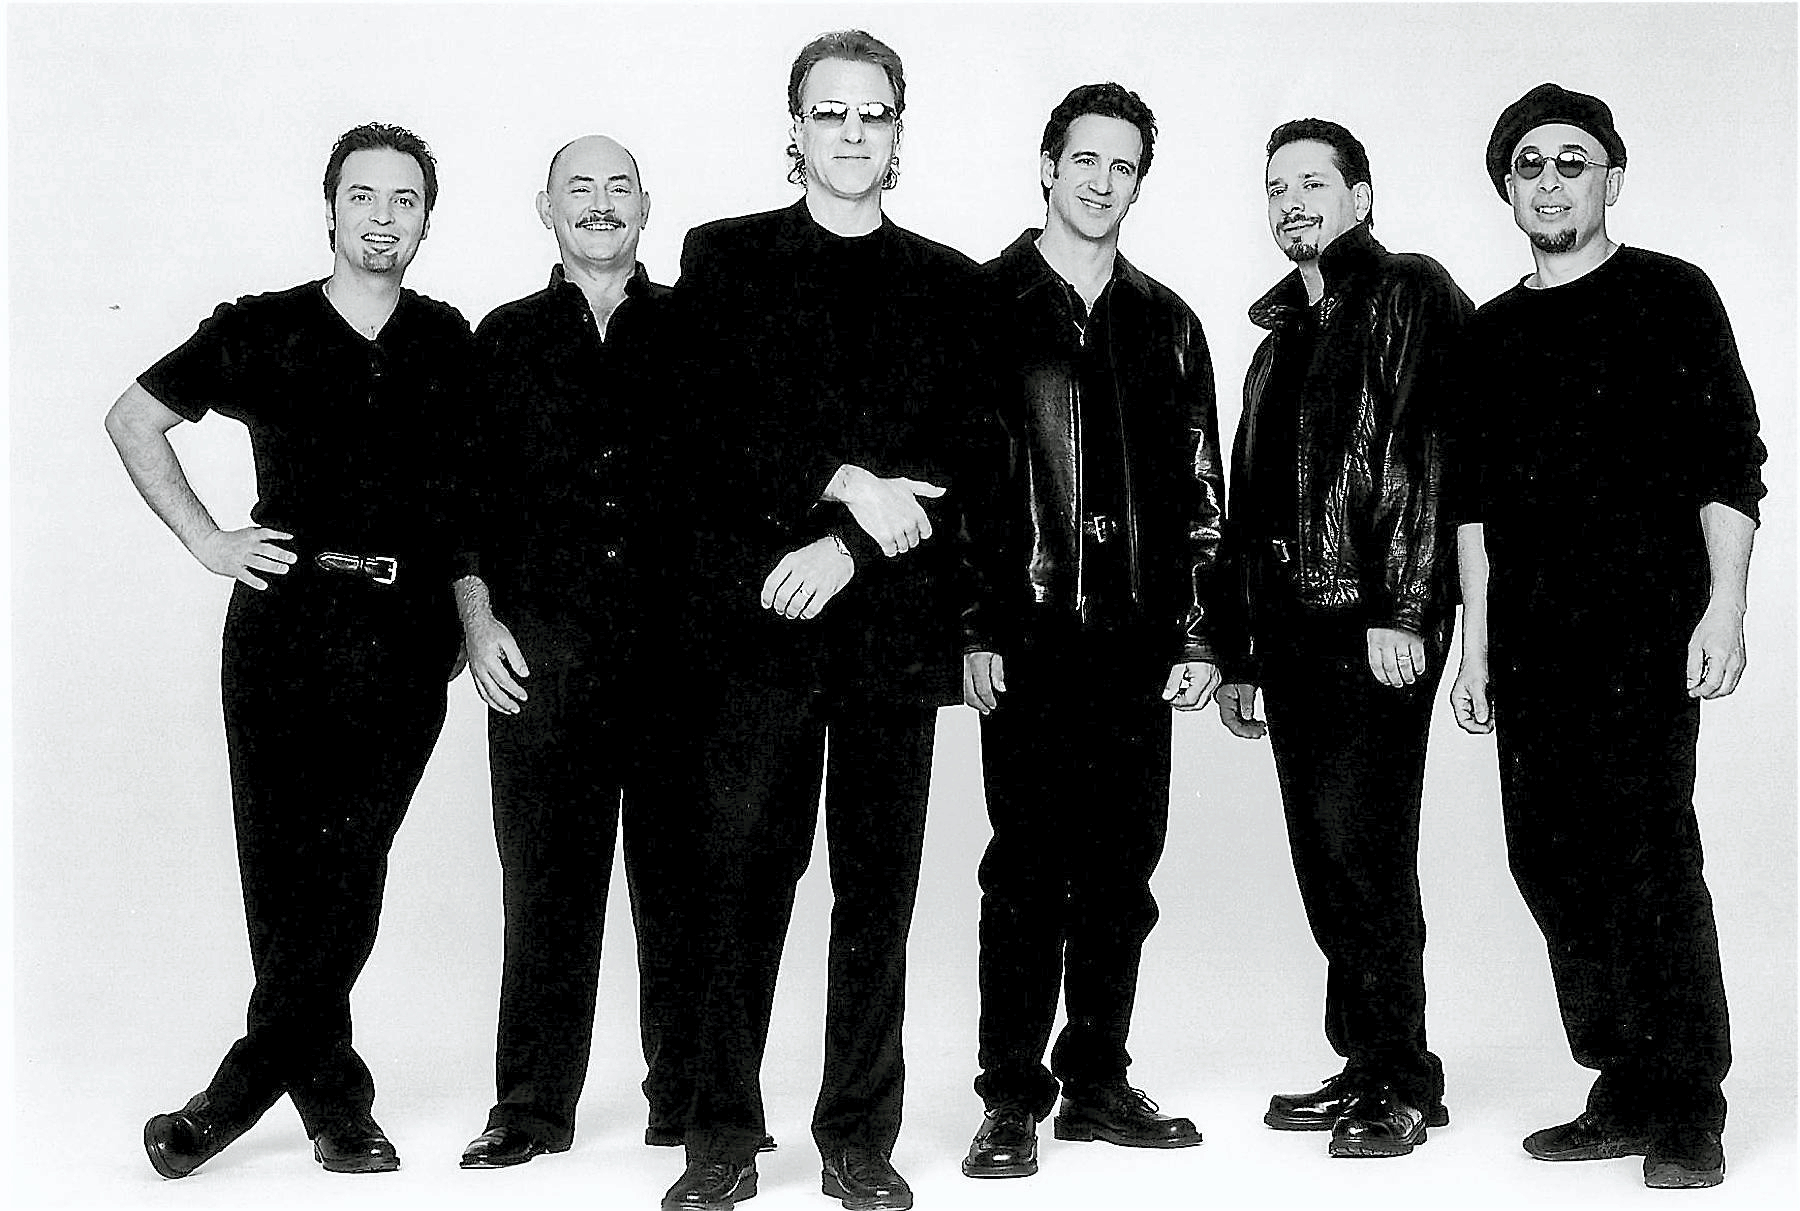 Concert Connection The Rippingtons to play Infinity Music Hall Hartford